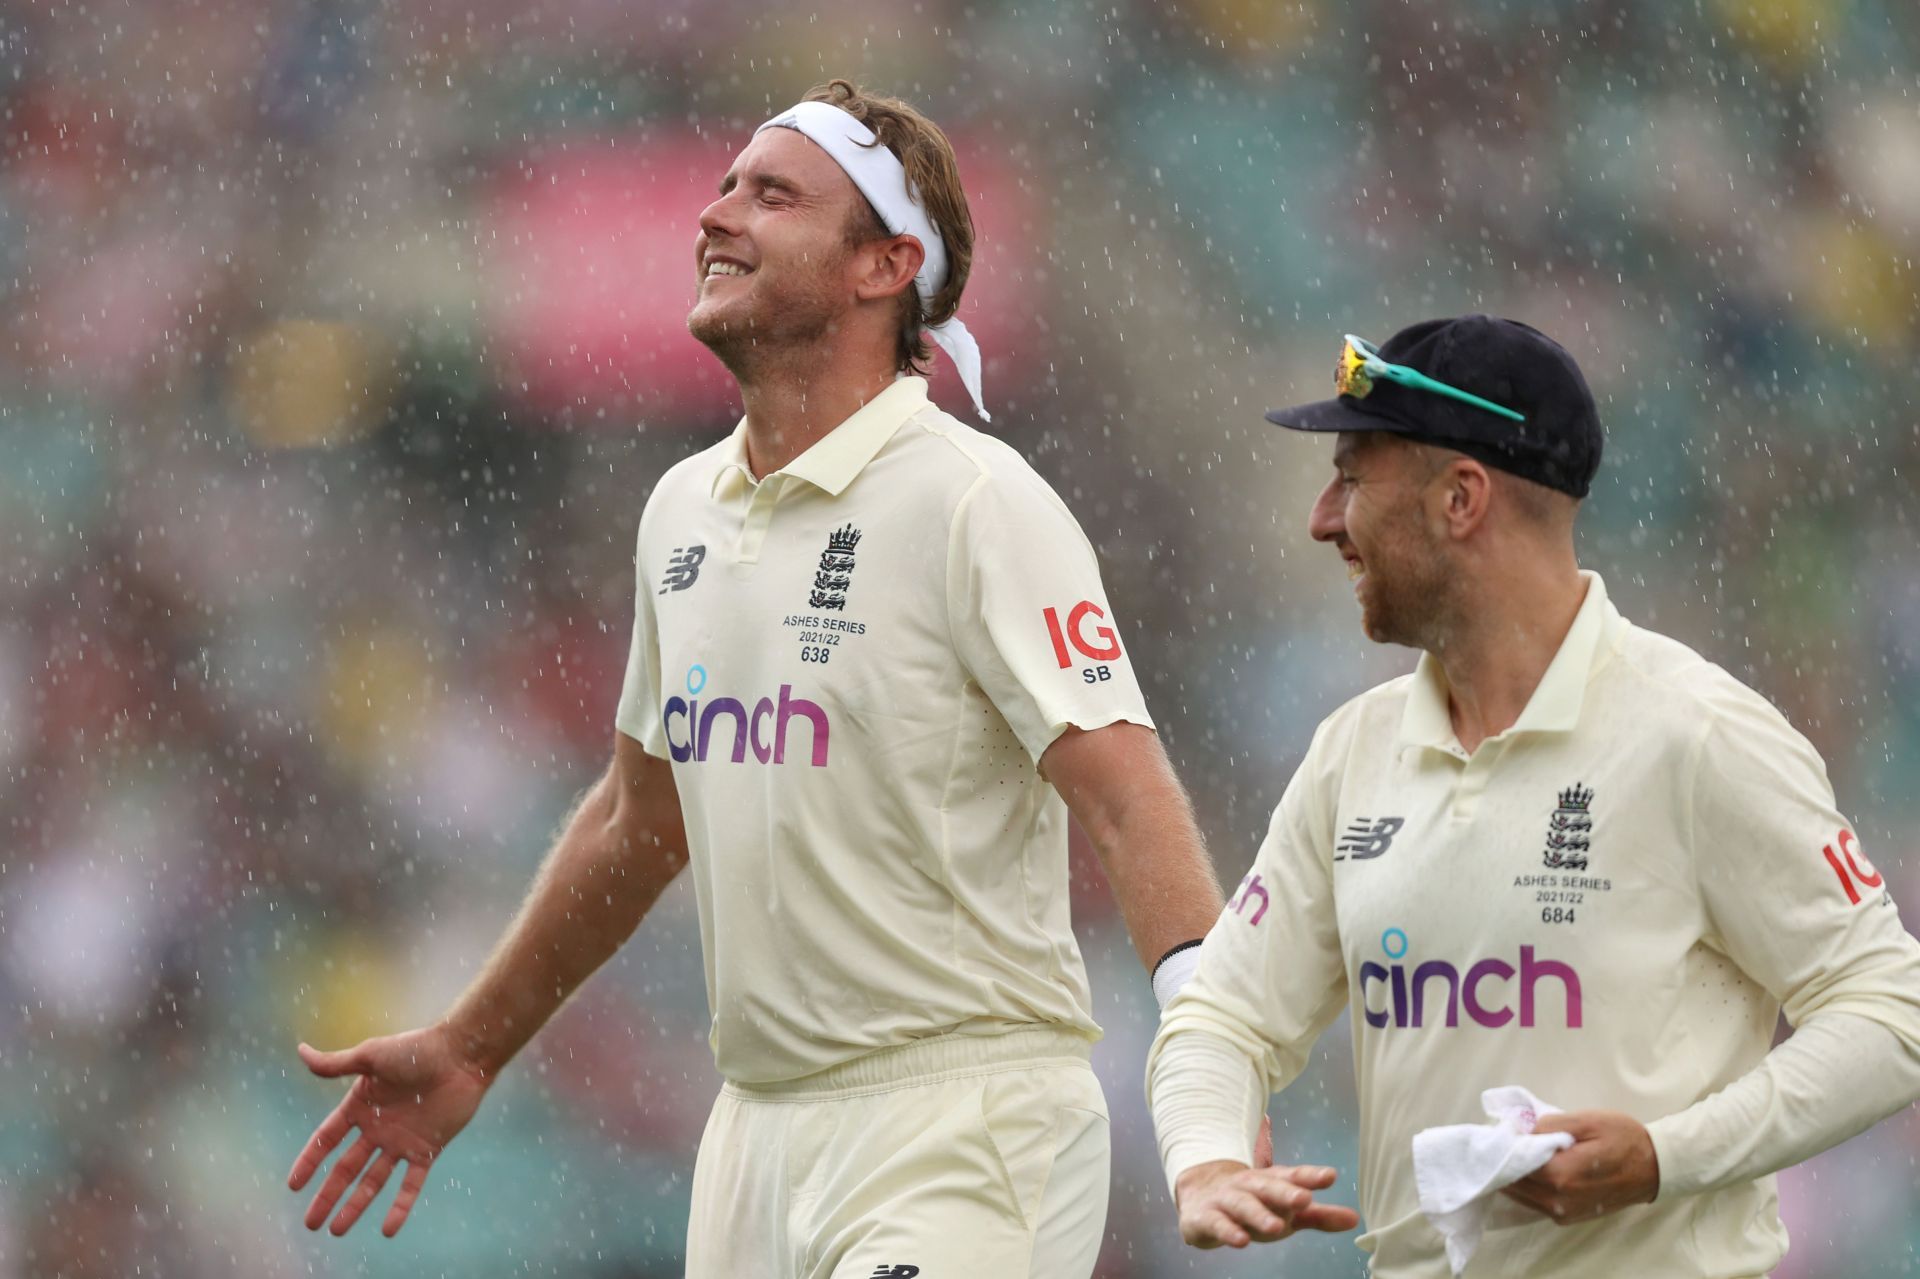 Stuart Broad registered figures of 5-101 in the first innings